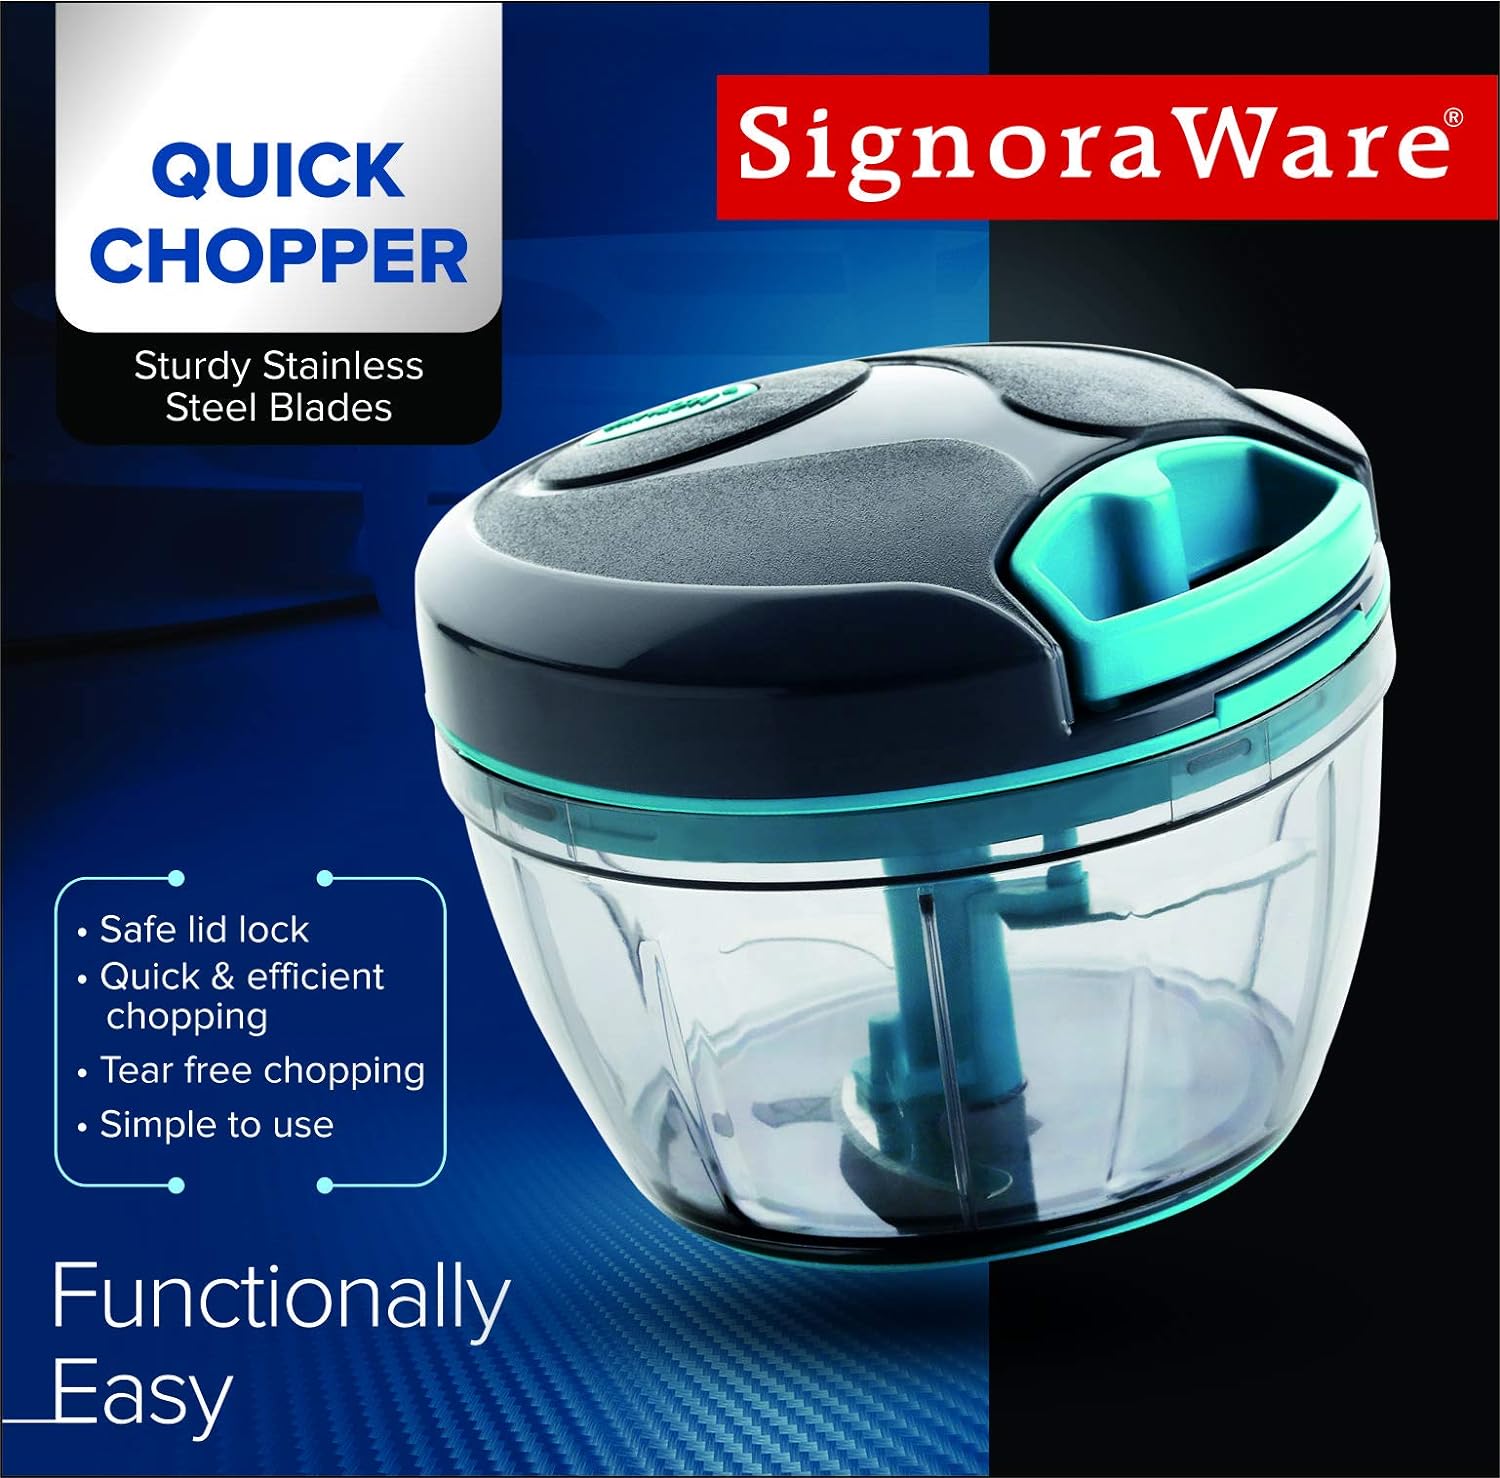 Signoraware Quick Chopper Multipurpose Manual Vegetable-Dry Fruit and Onion Handy Chopper and Quick Cutter Machine for Kitchen with 3 Stainless Steel Blade-Stumbit Kitchen